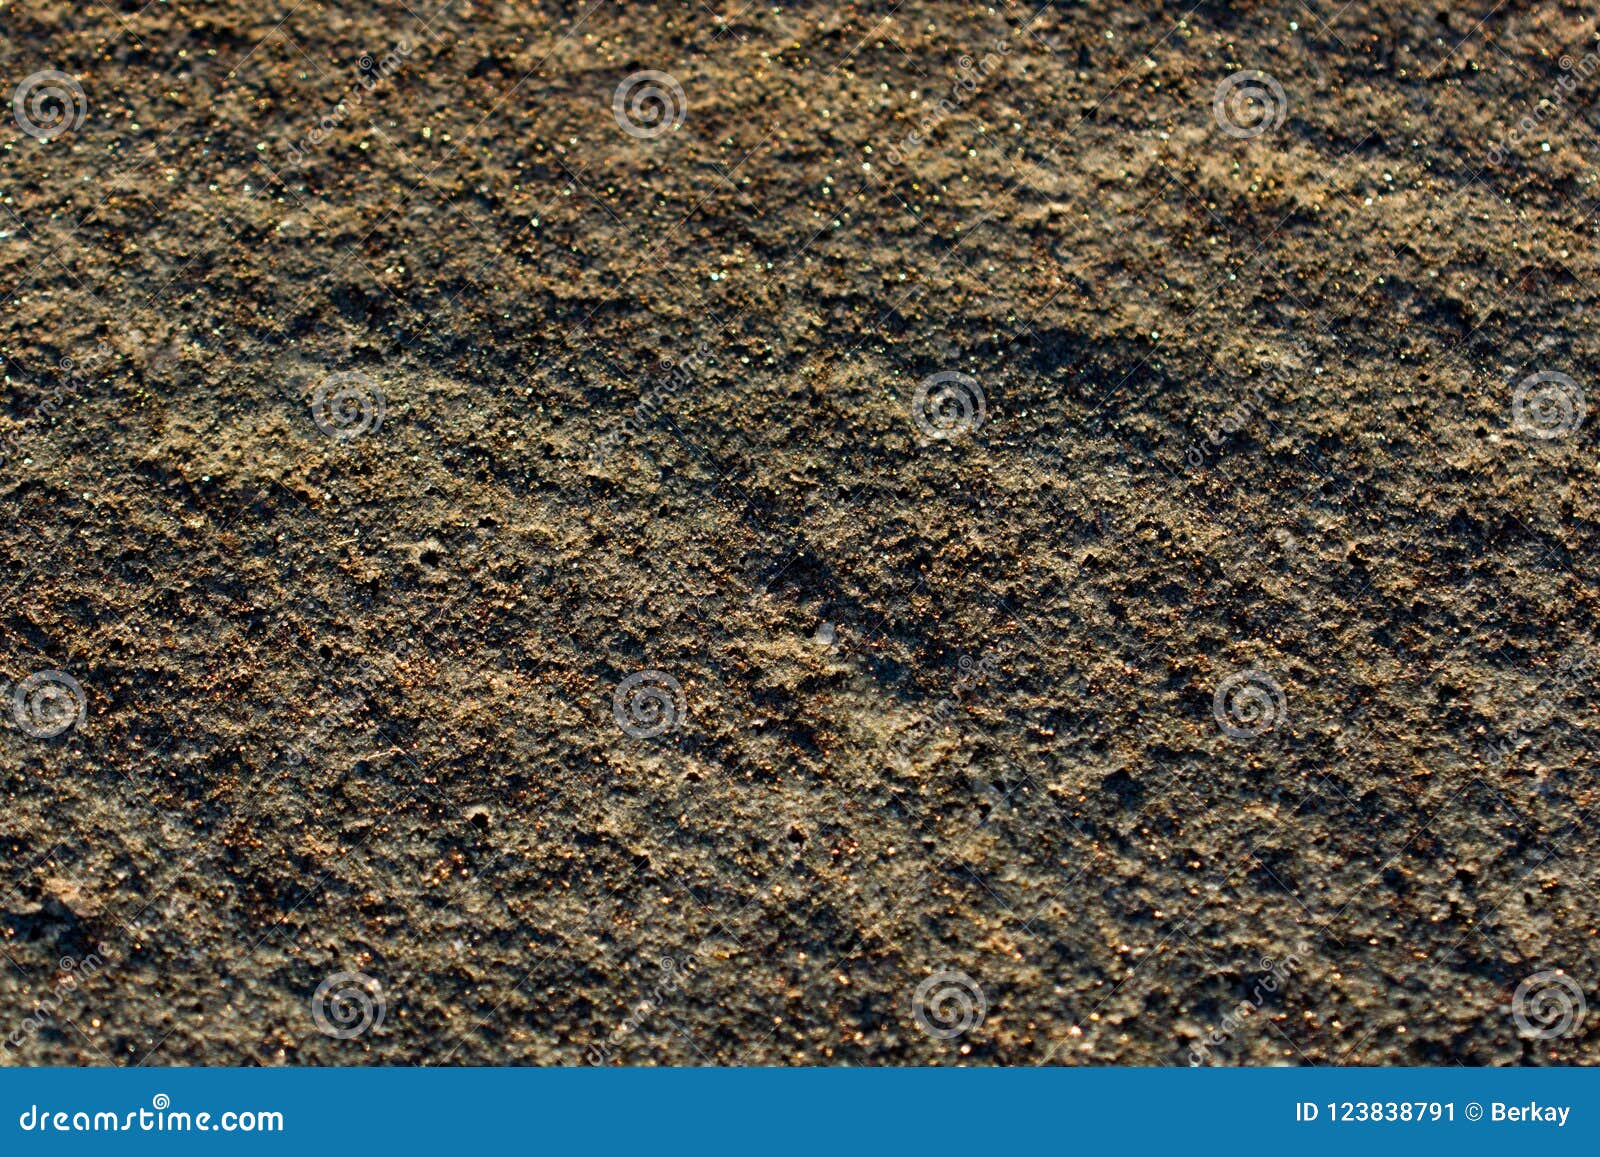 Rock or Stone As Natural Background Texture Stock Image - Image of ...